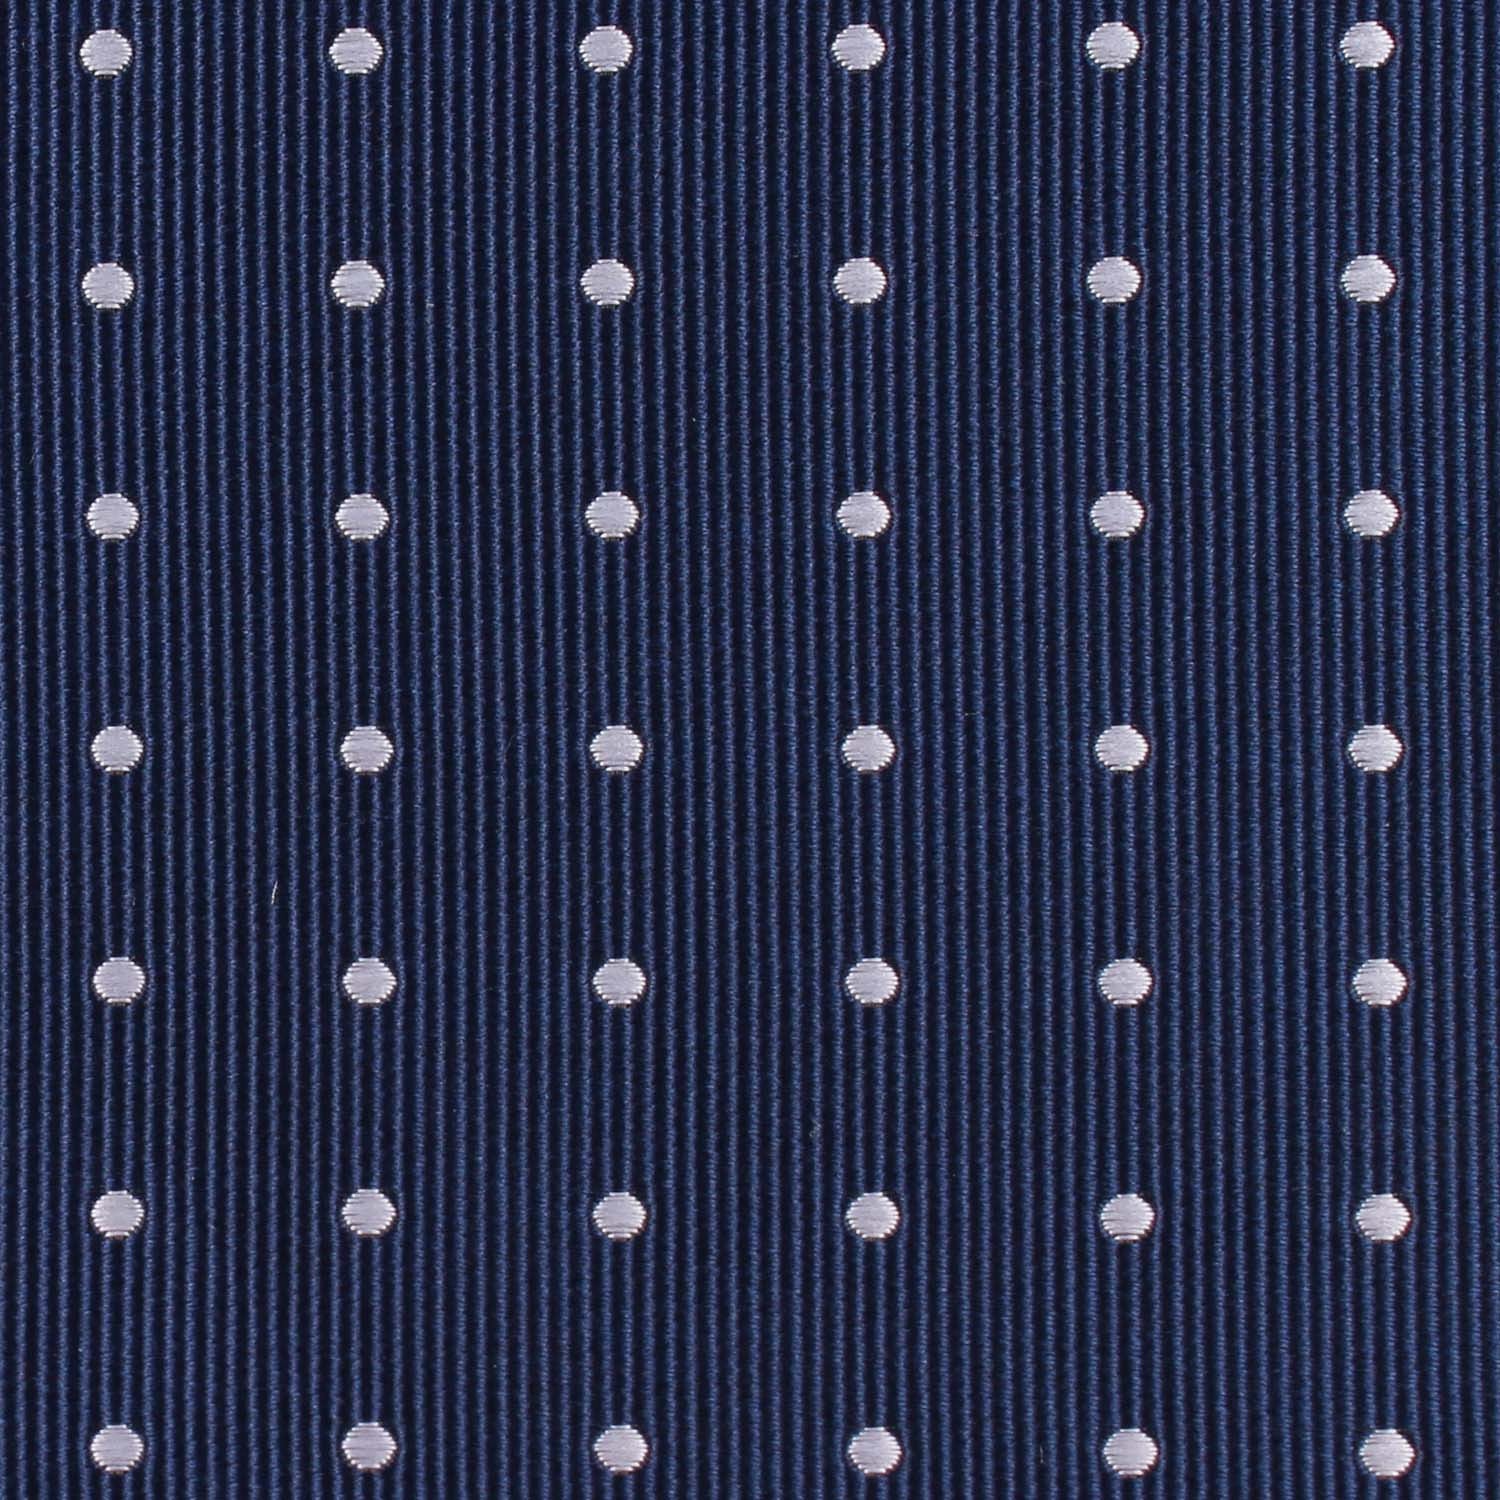 The OTAA Navy Blue with White Polka Dots Fabric Skinny Tie M131